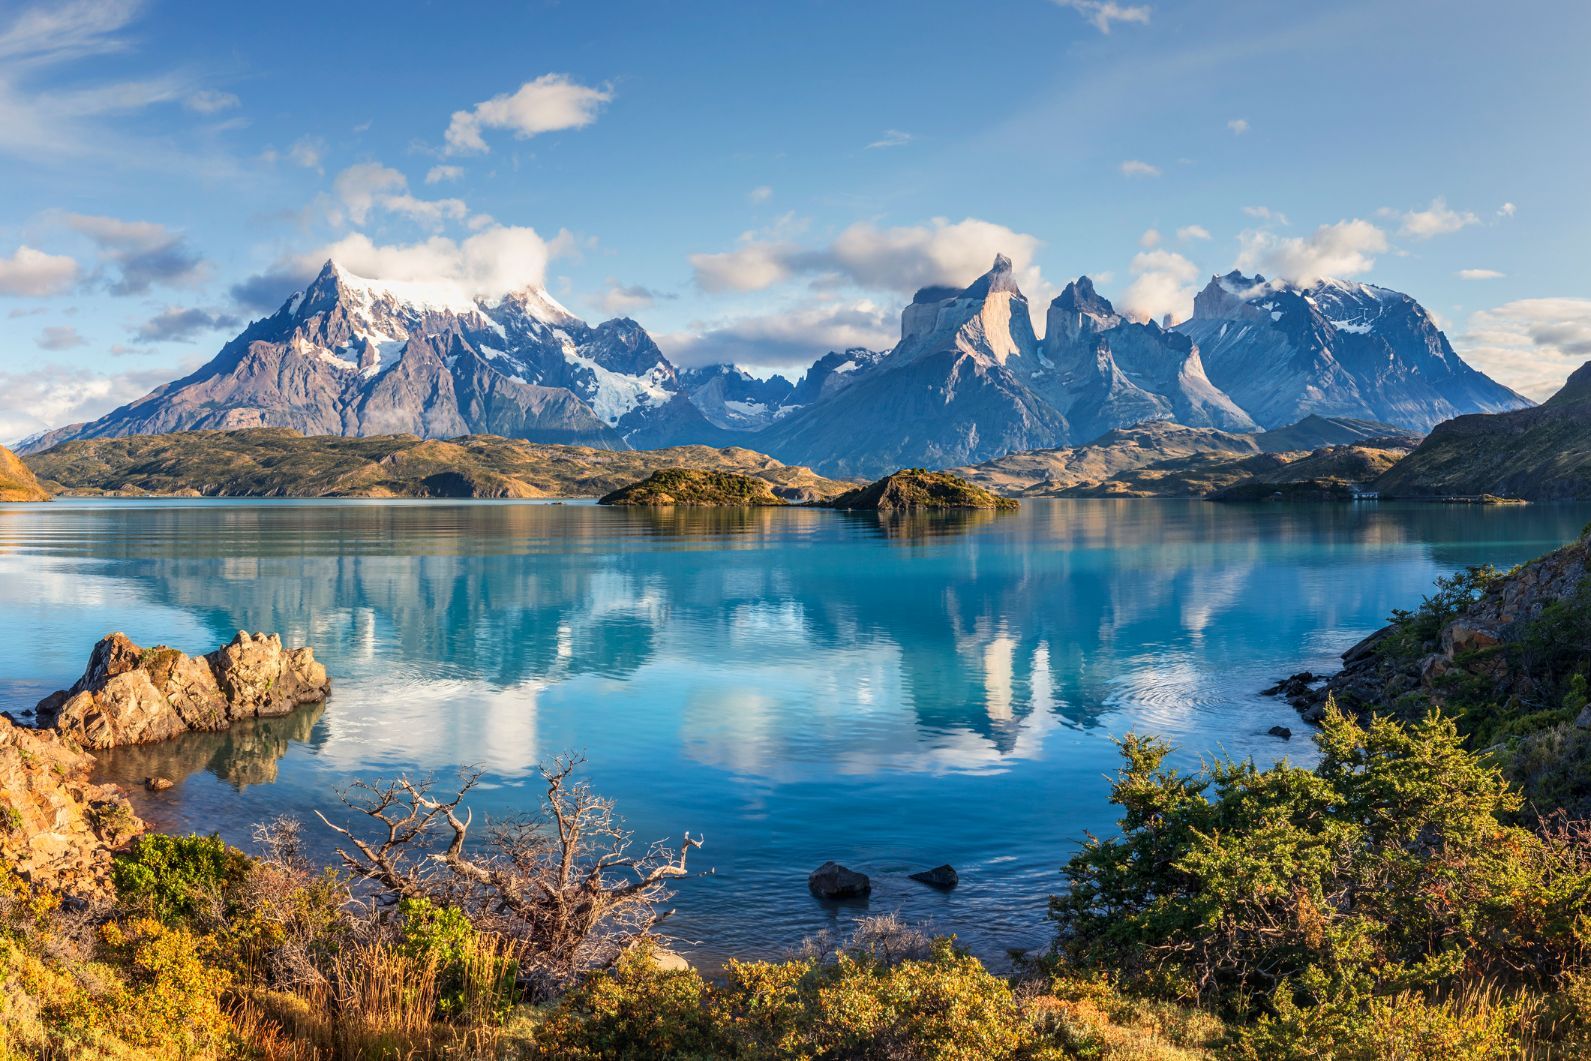 Cross over to Chile! Come discover the beauty of Chile right on